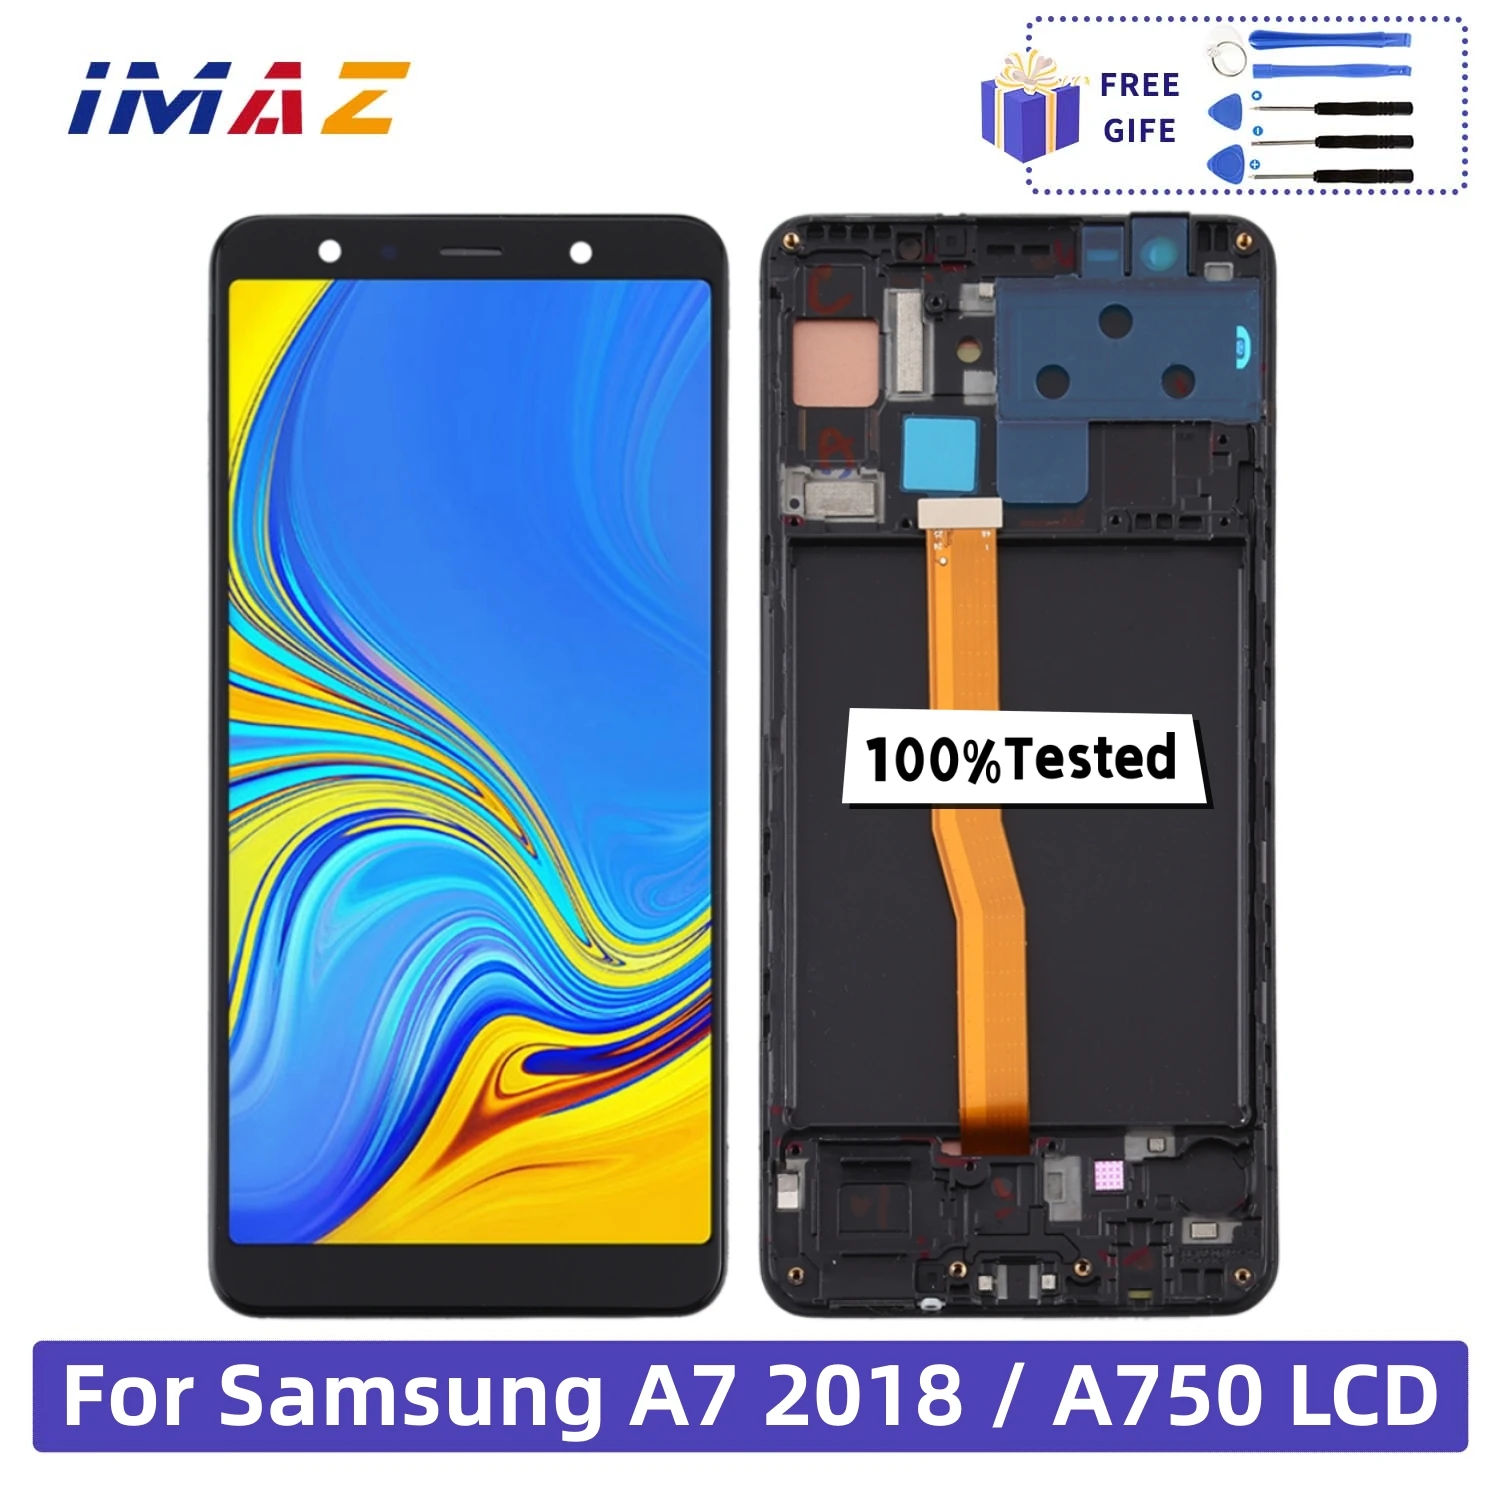 

AAAAA+ Quality A750 LCD For Samsung Galaxy A7 2018 LCD SM-A750F A750F A750 Display With Frame Touch Screen Digitizer Replacement